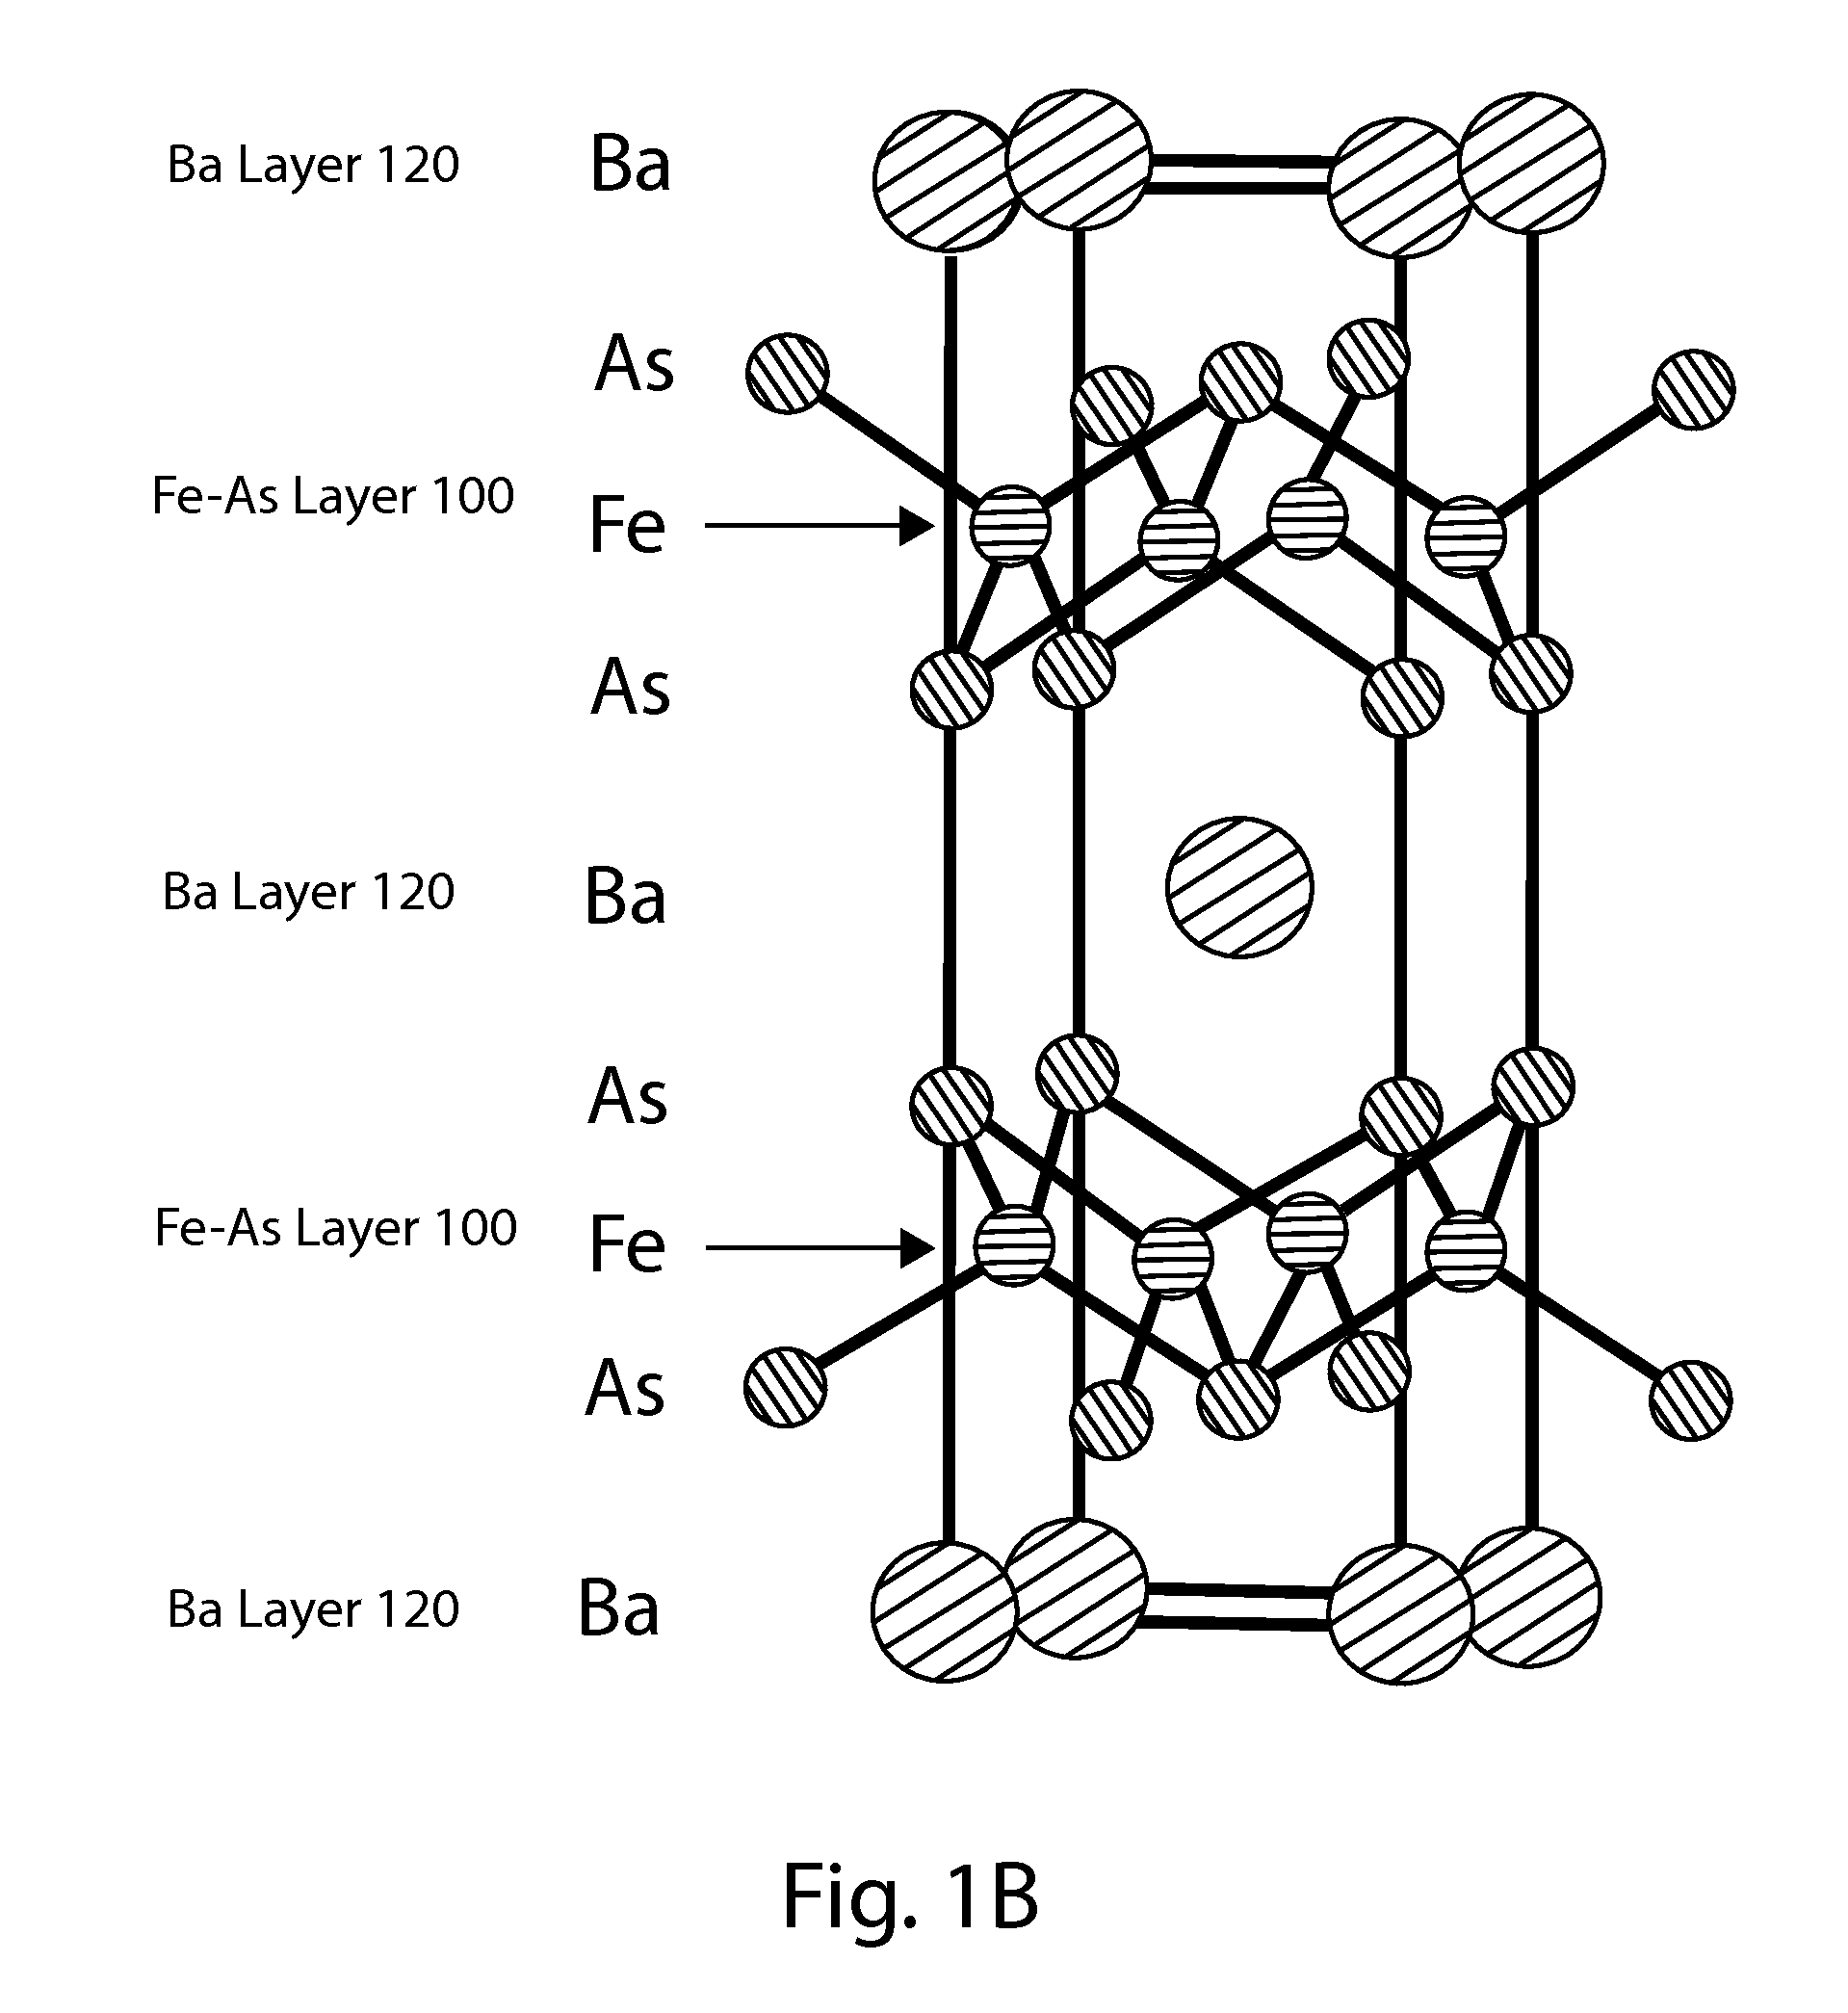 Superconducting integrated circuit technology using iron-arsenic compounds